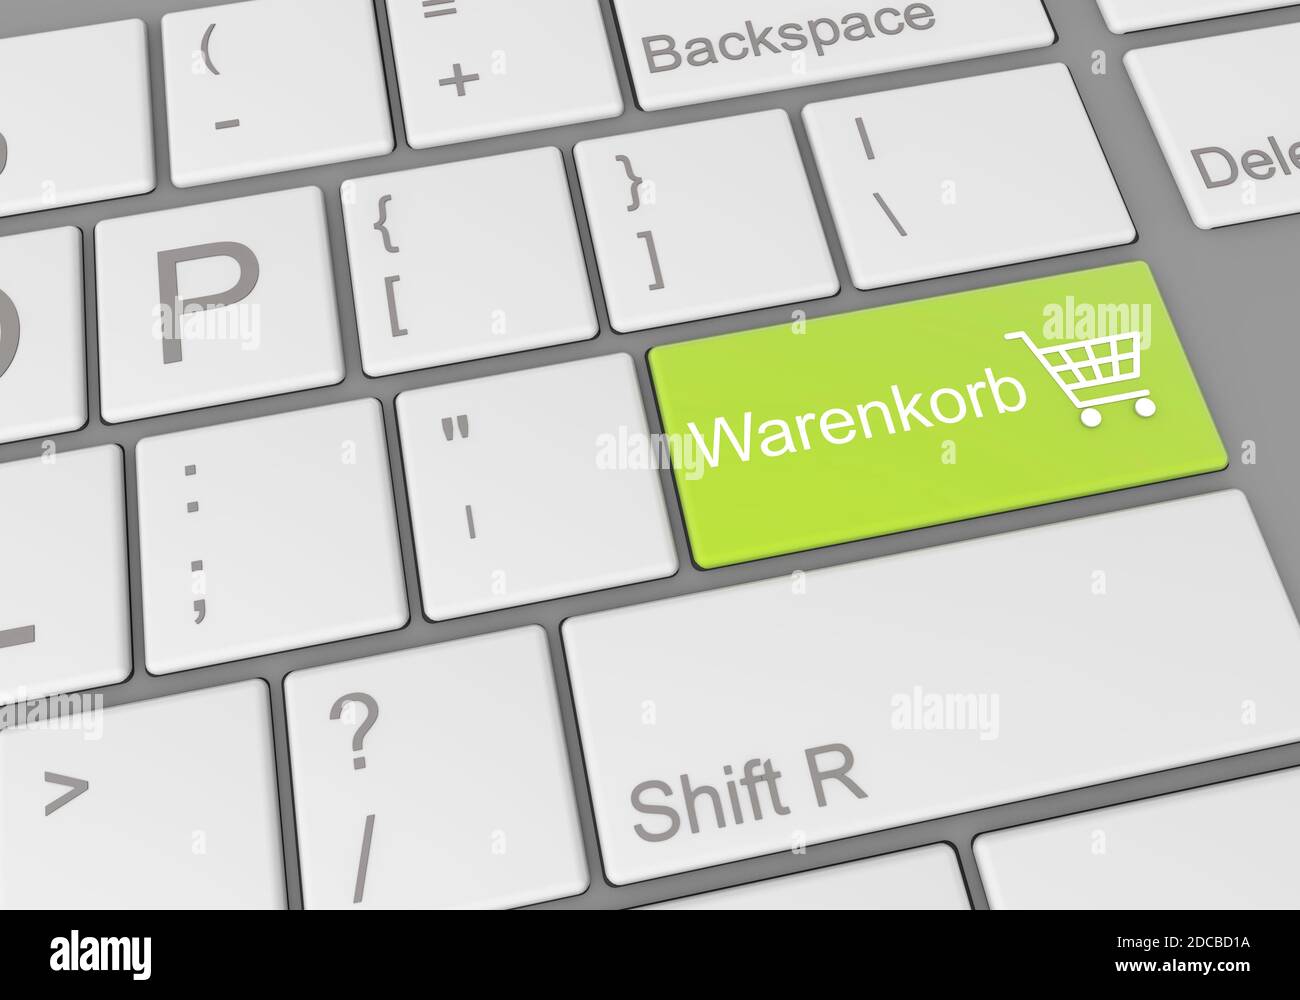 A special 'warenkorb' button on a laptop keyboard Stock Photo